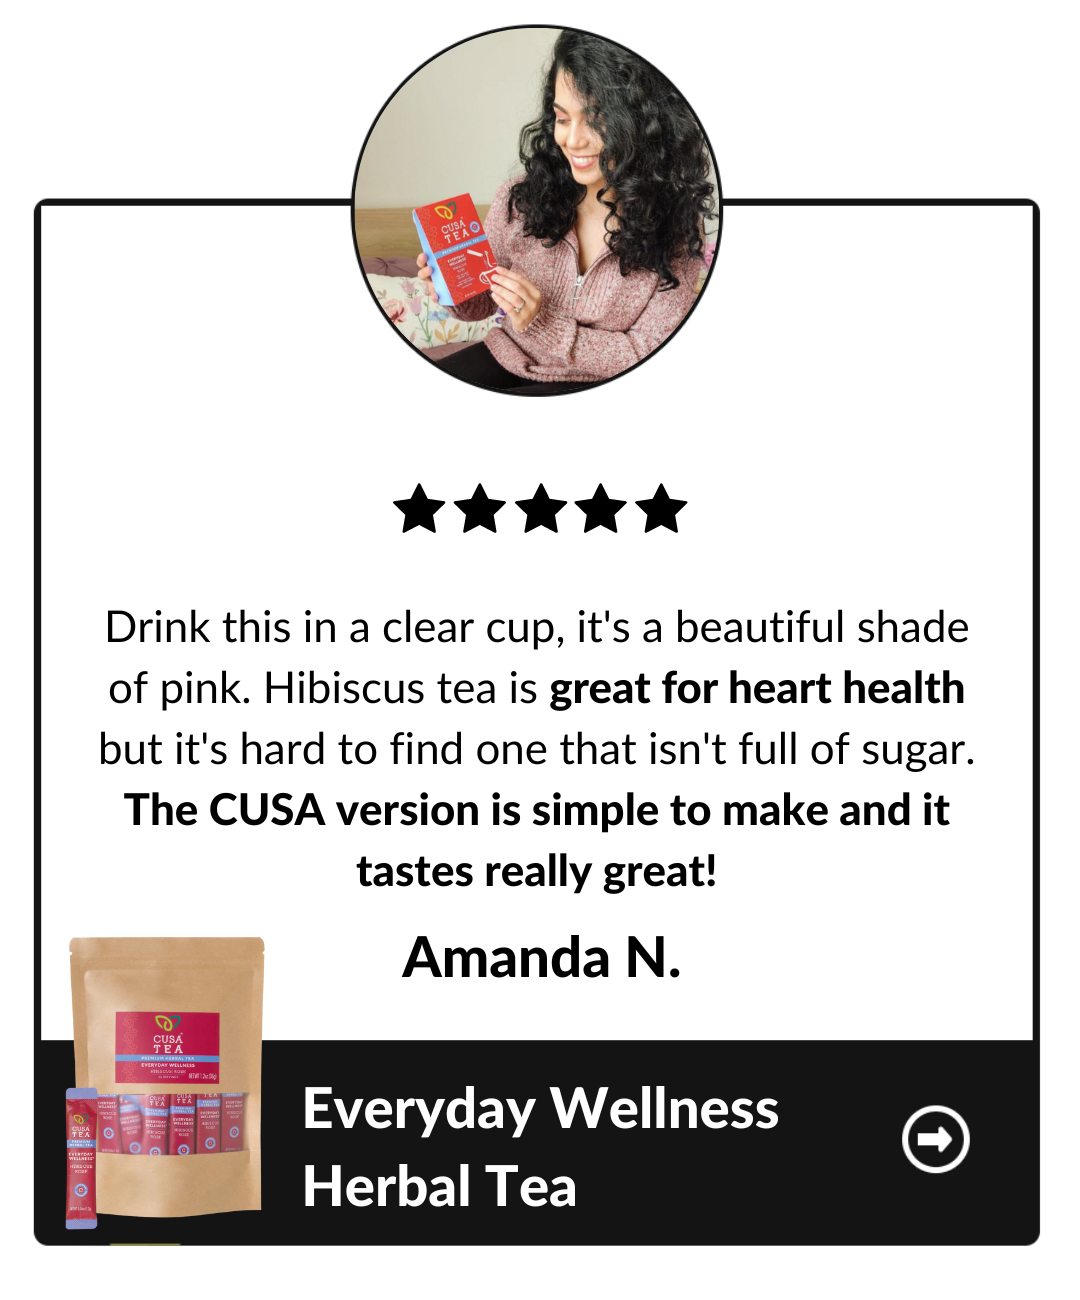 Drink this in a clear cup, it's a beautiful shade of pink. Hibiscus tea is great for heart health but it's hard to find one that isn't full of sugar. The CUSA version is simple to make and it tastes really great! Amanda N, Everyday Wellness Herbal Tea testimonial